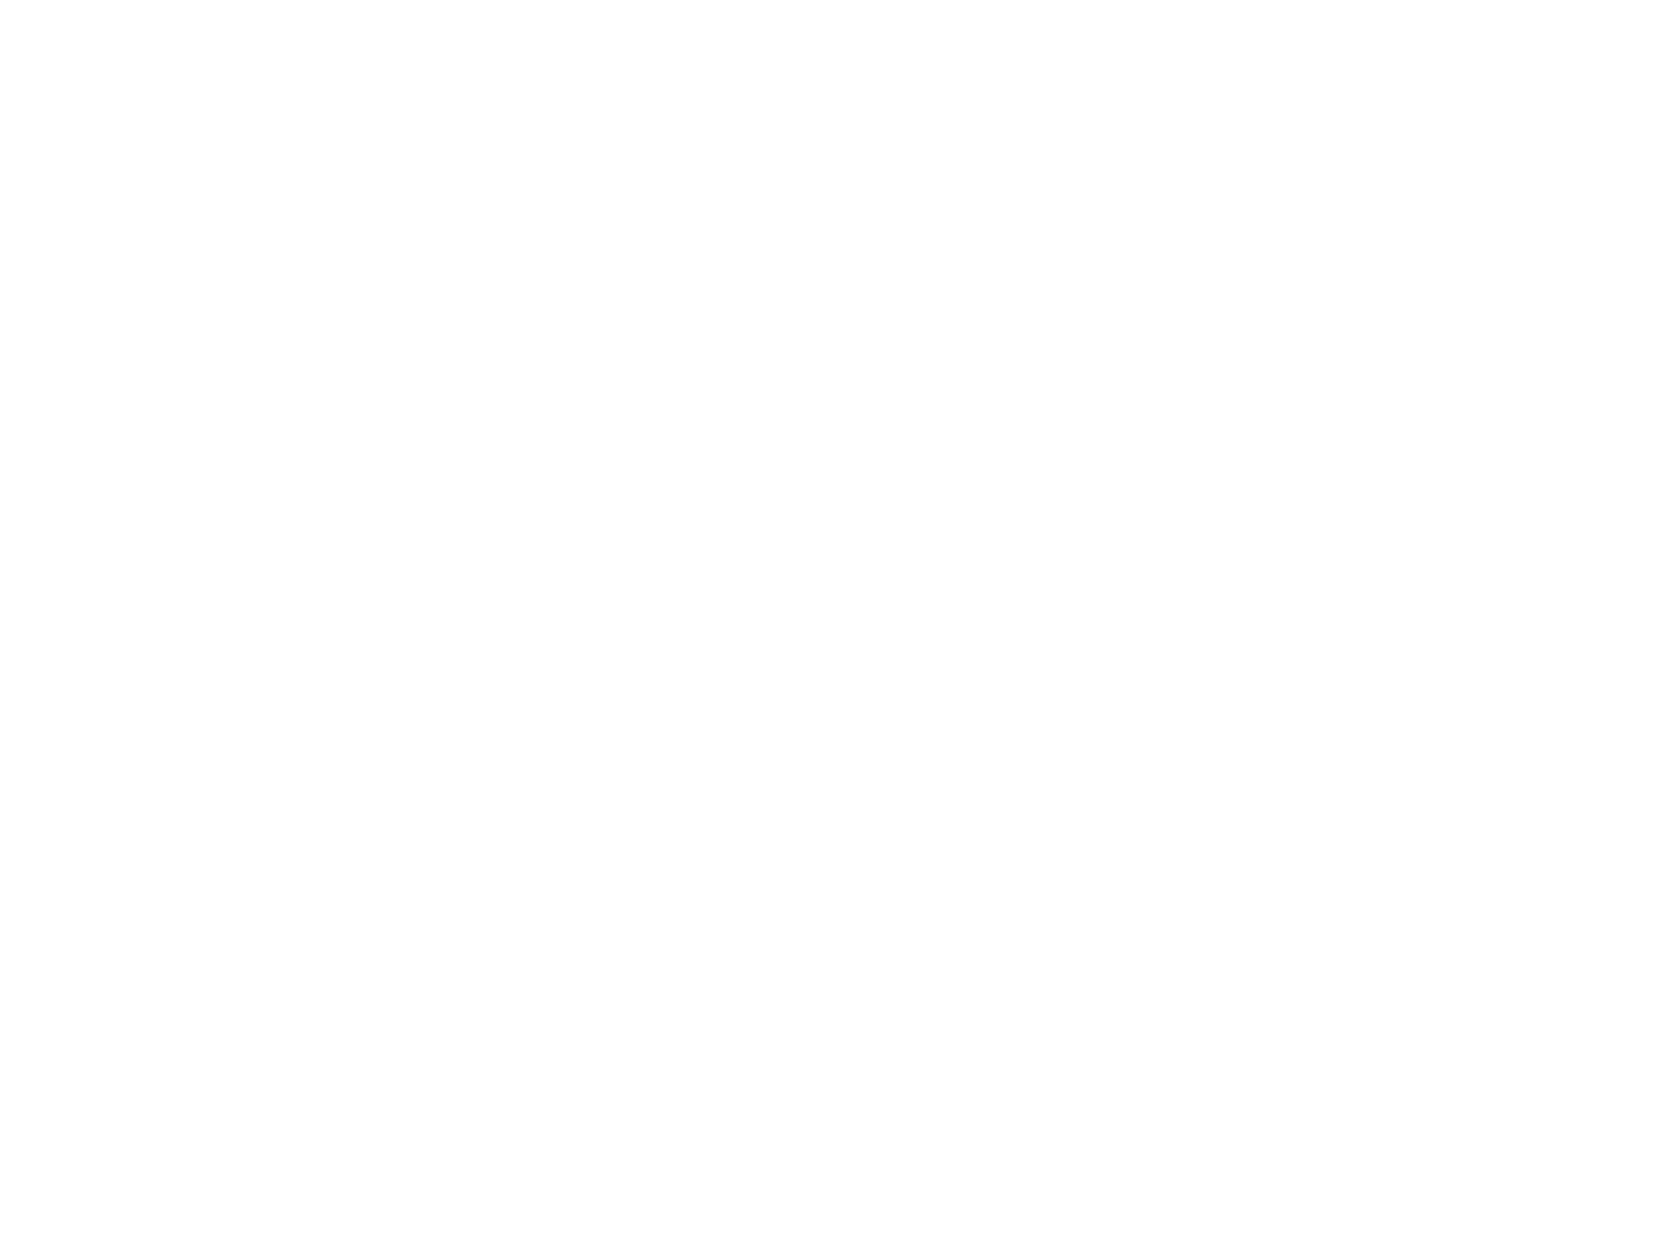 id-badge-solid-icon